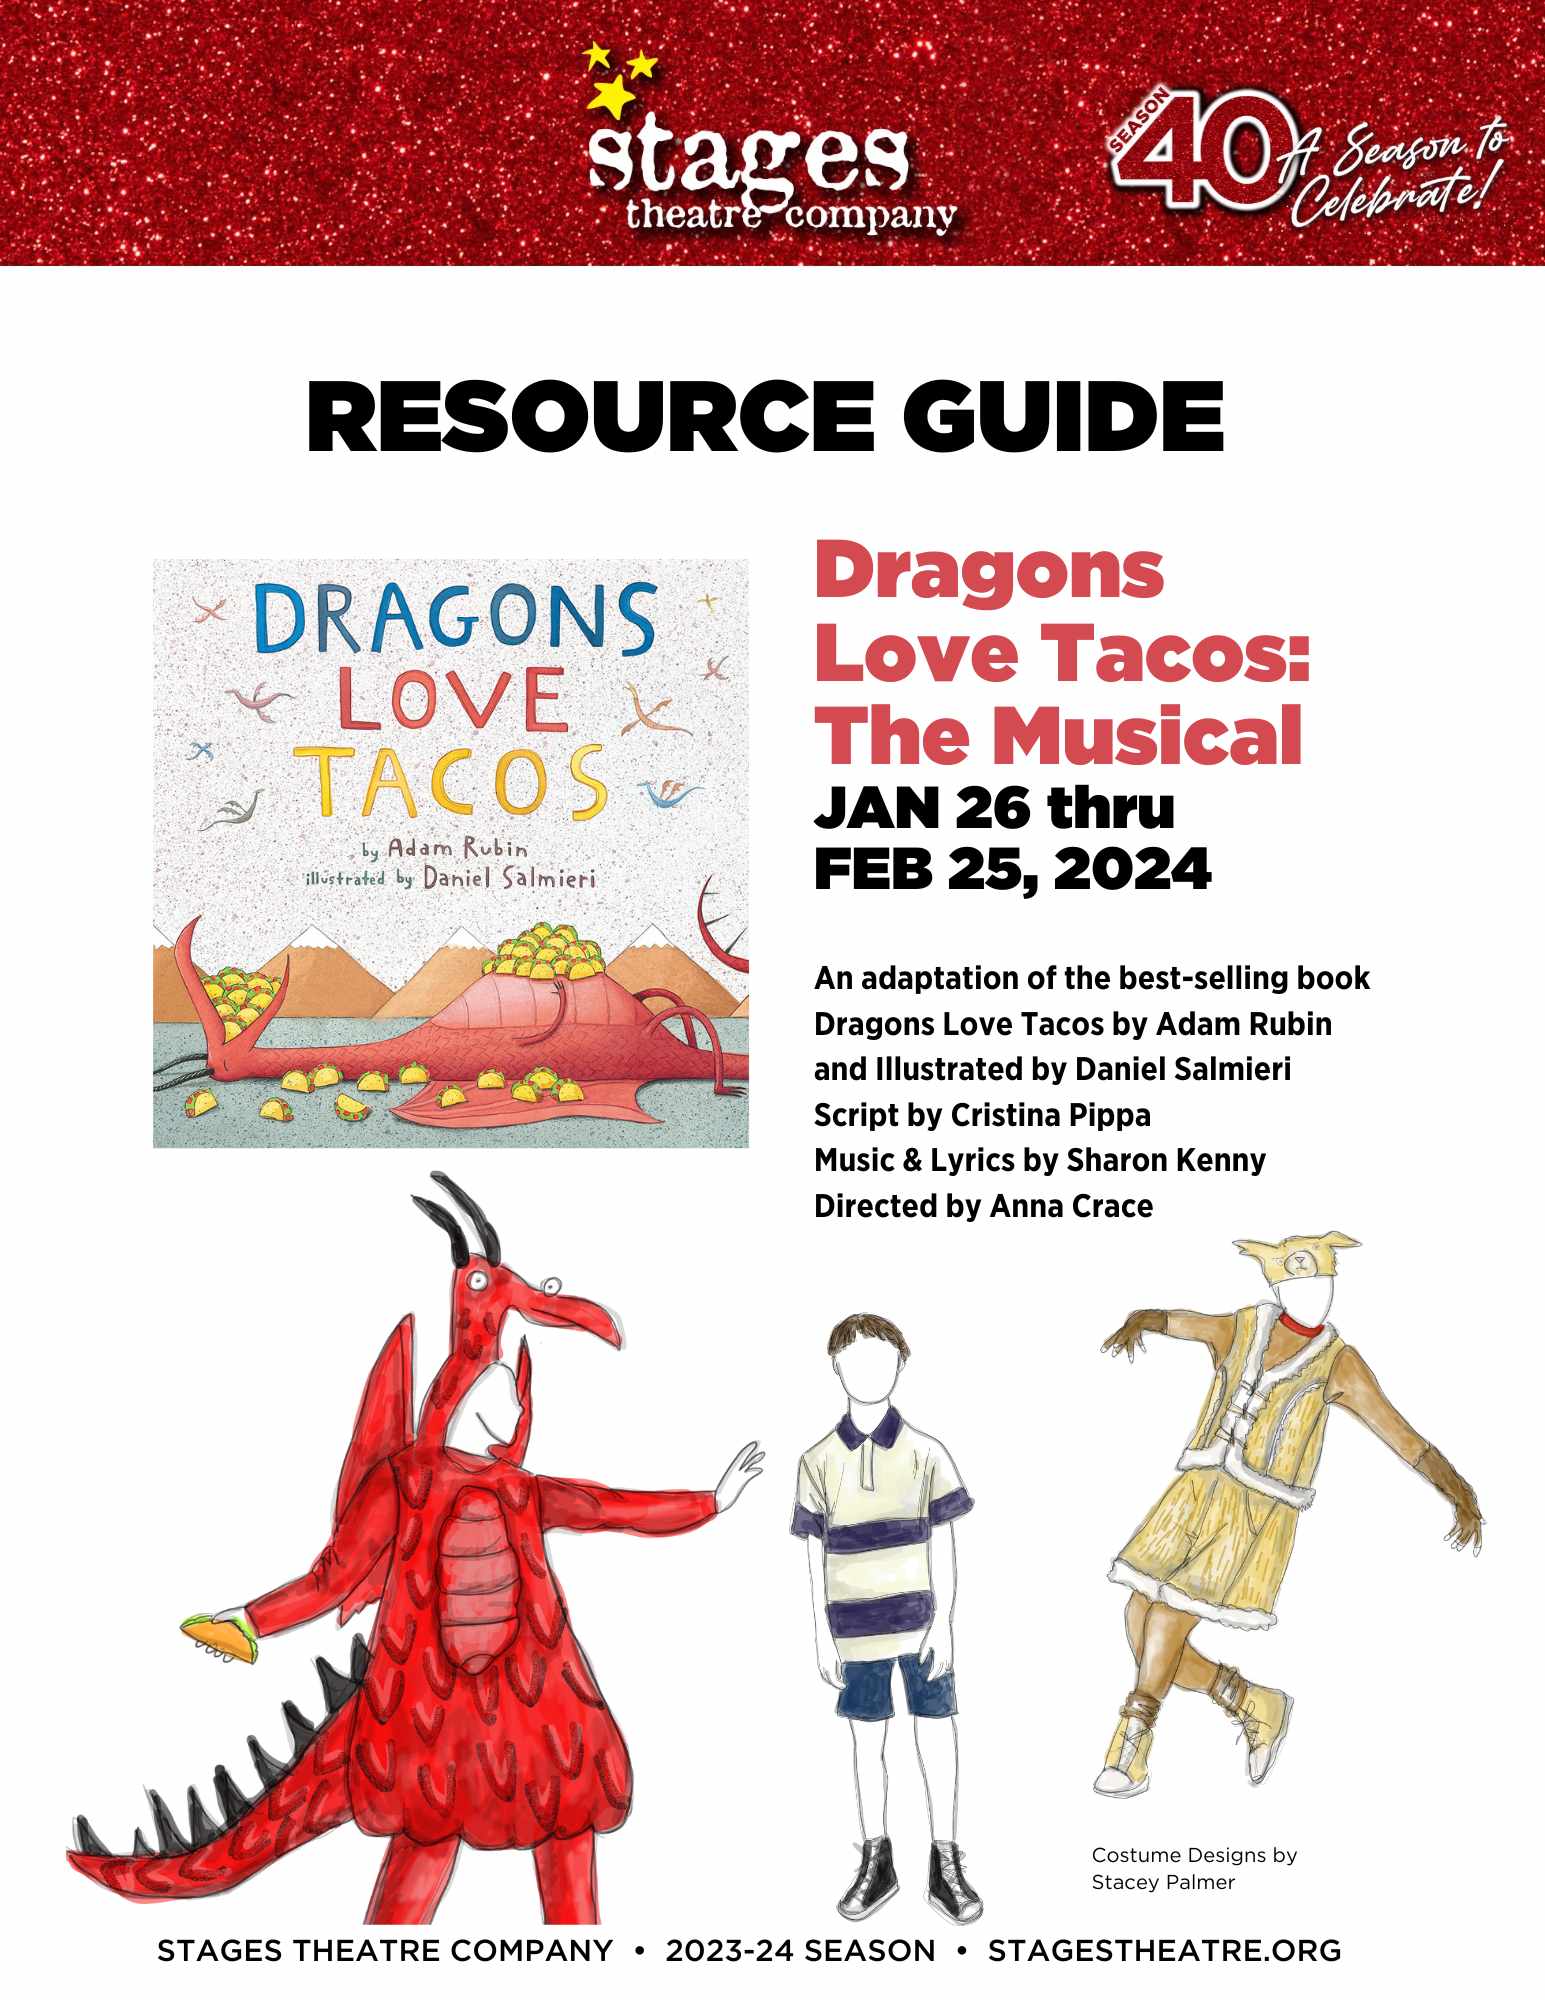 Resource Guide for Dragons Love Tacos: The Musical at Stages Theatre Company